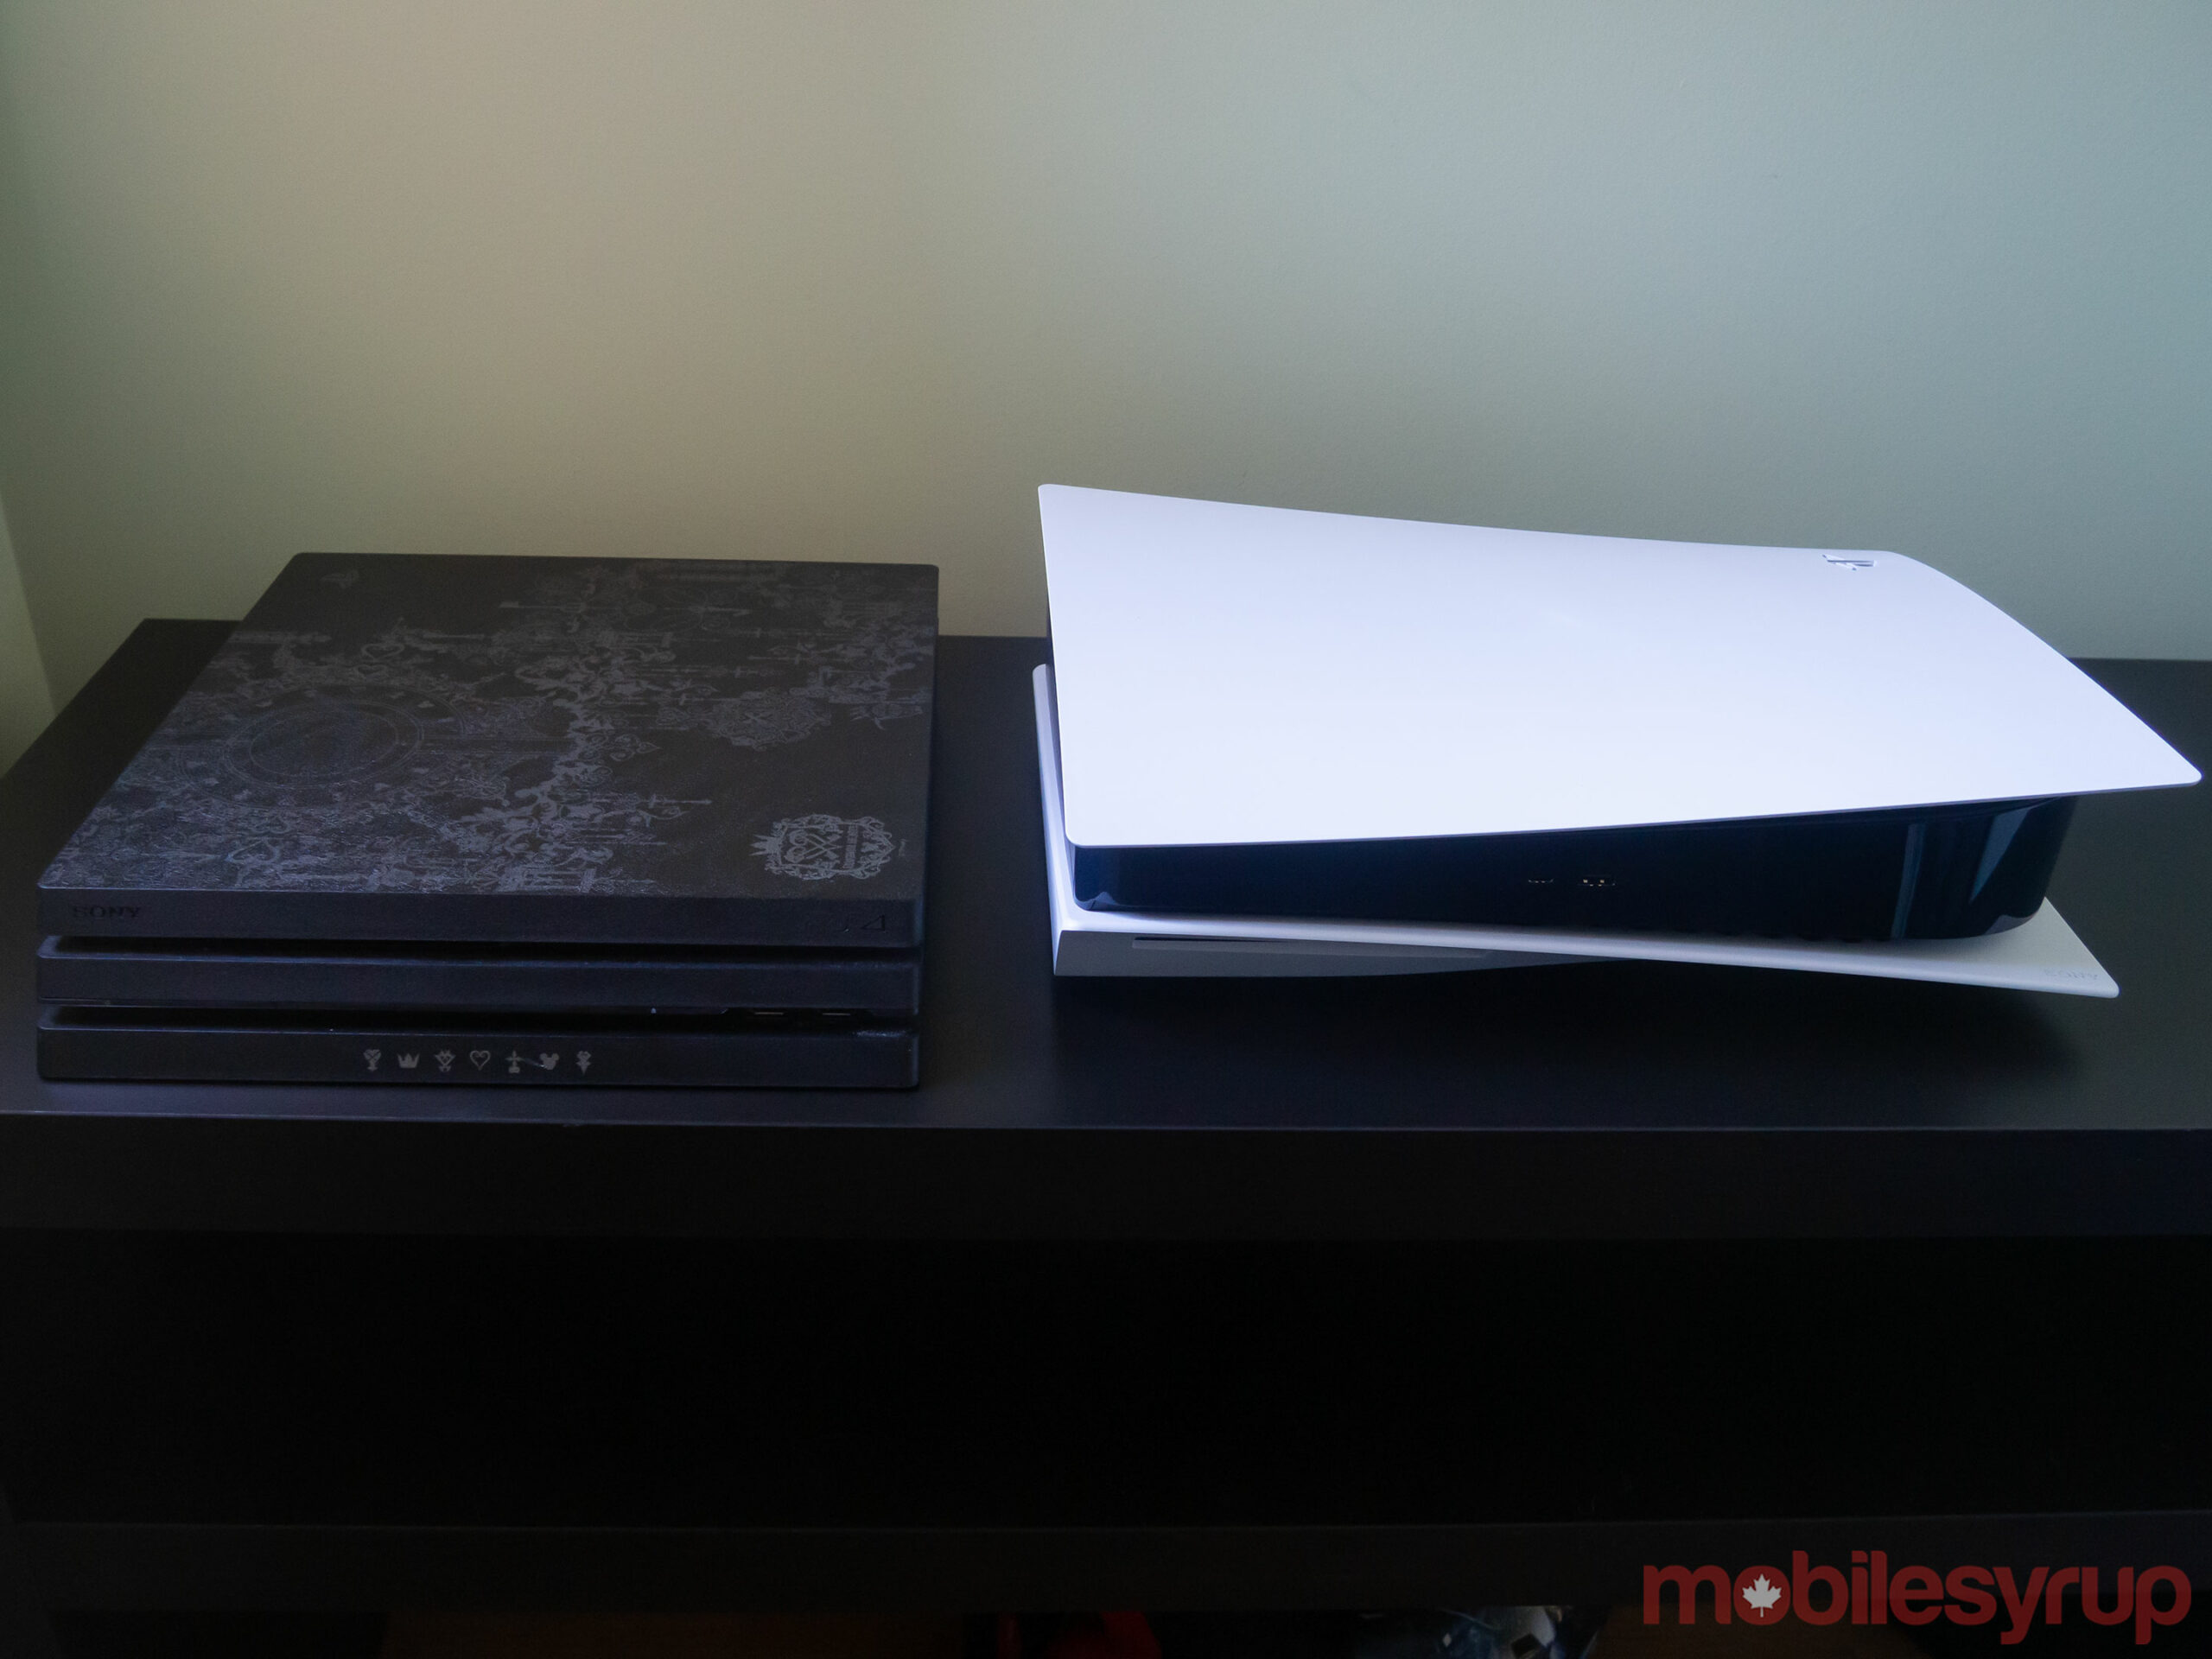 PlayStation 4 Pro beside the PlayStation 5 